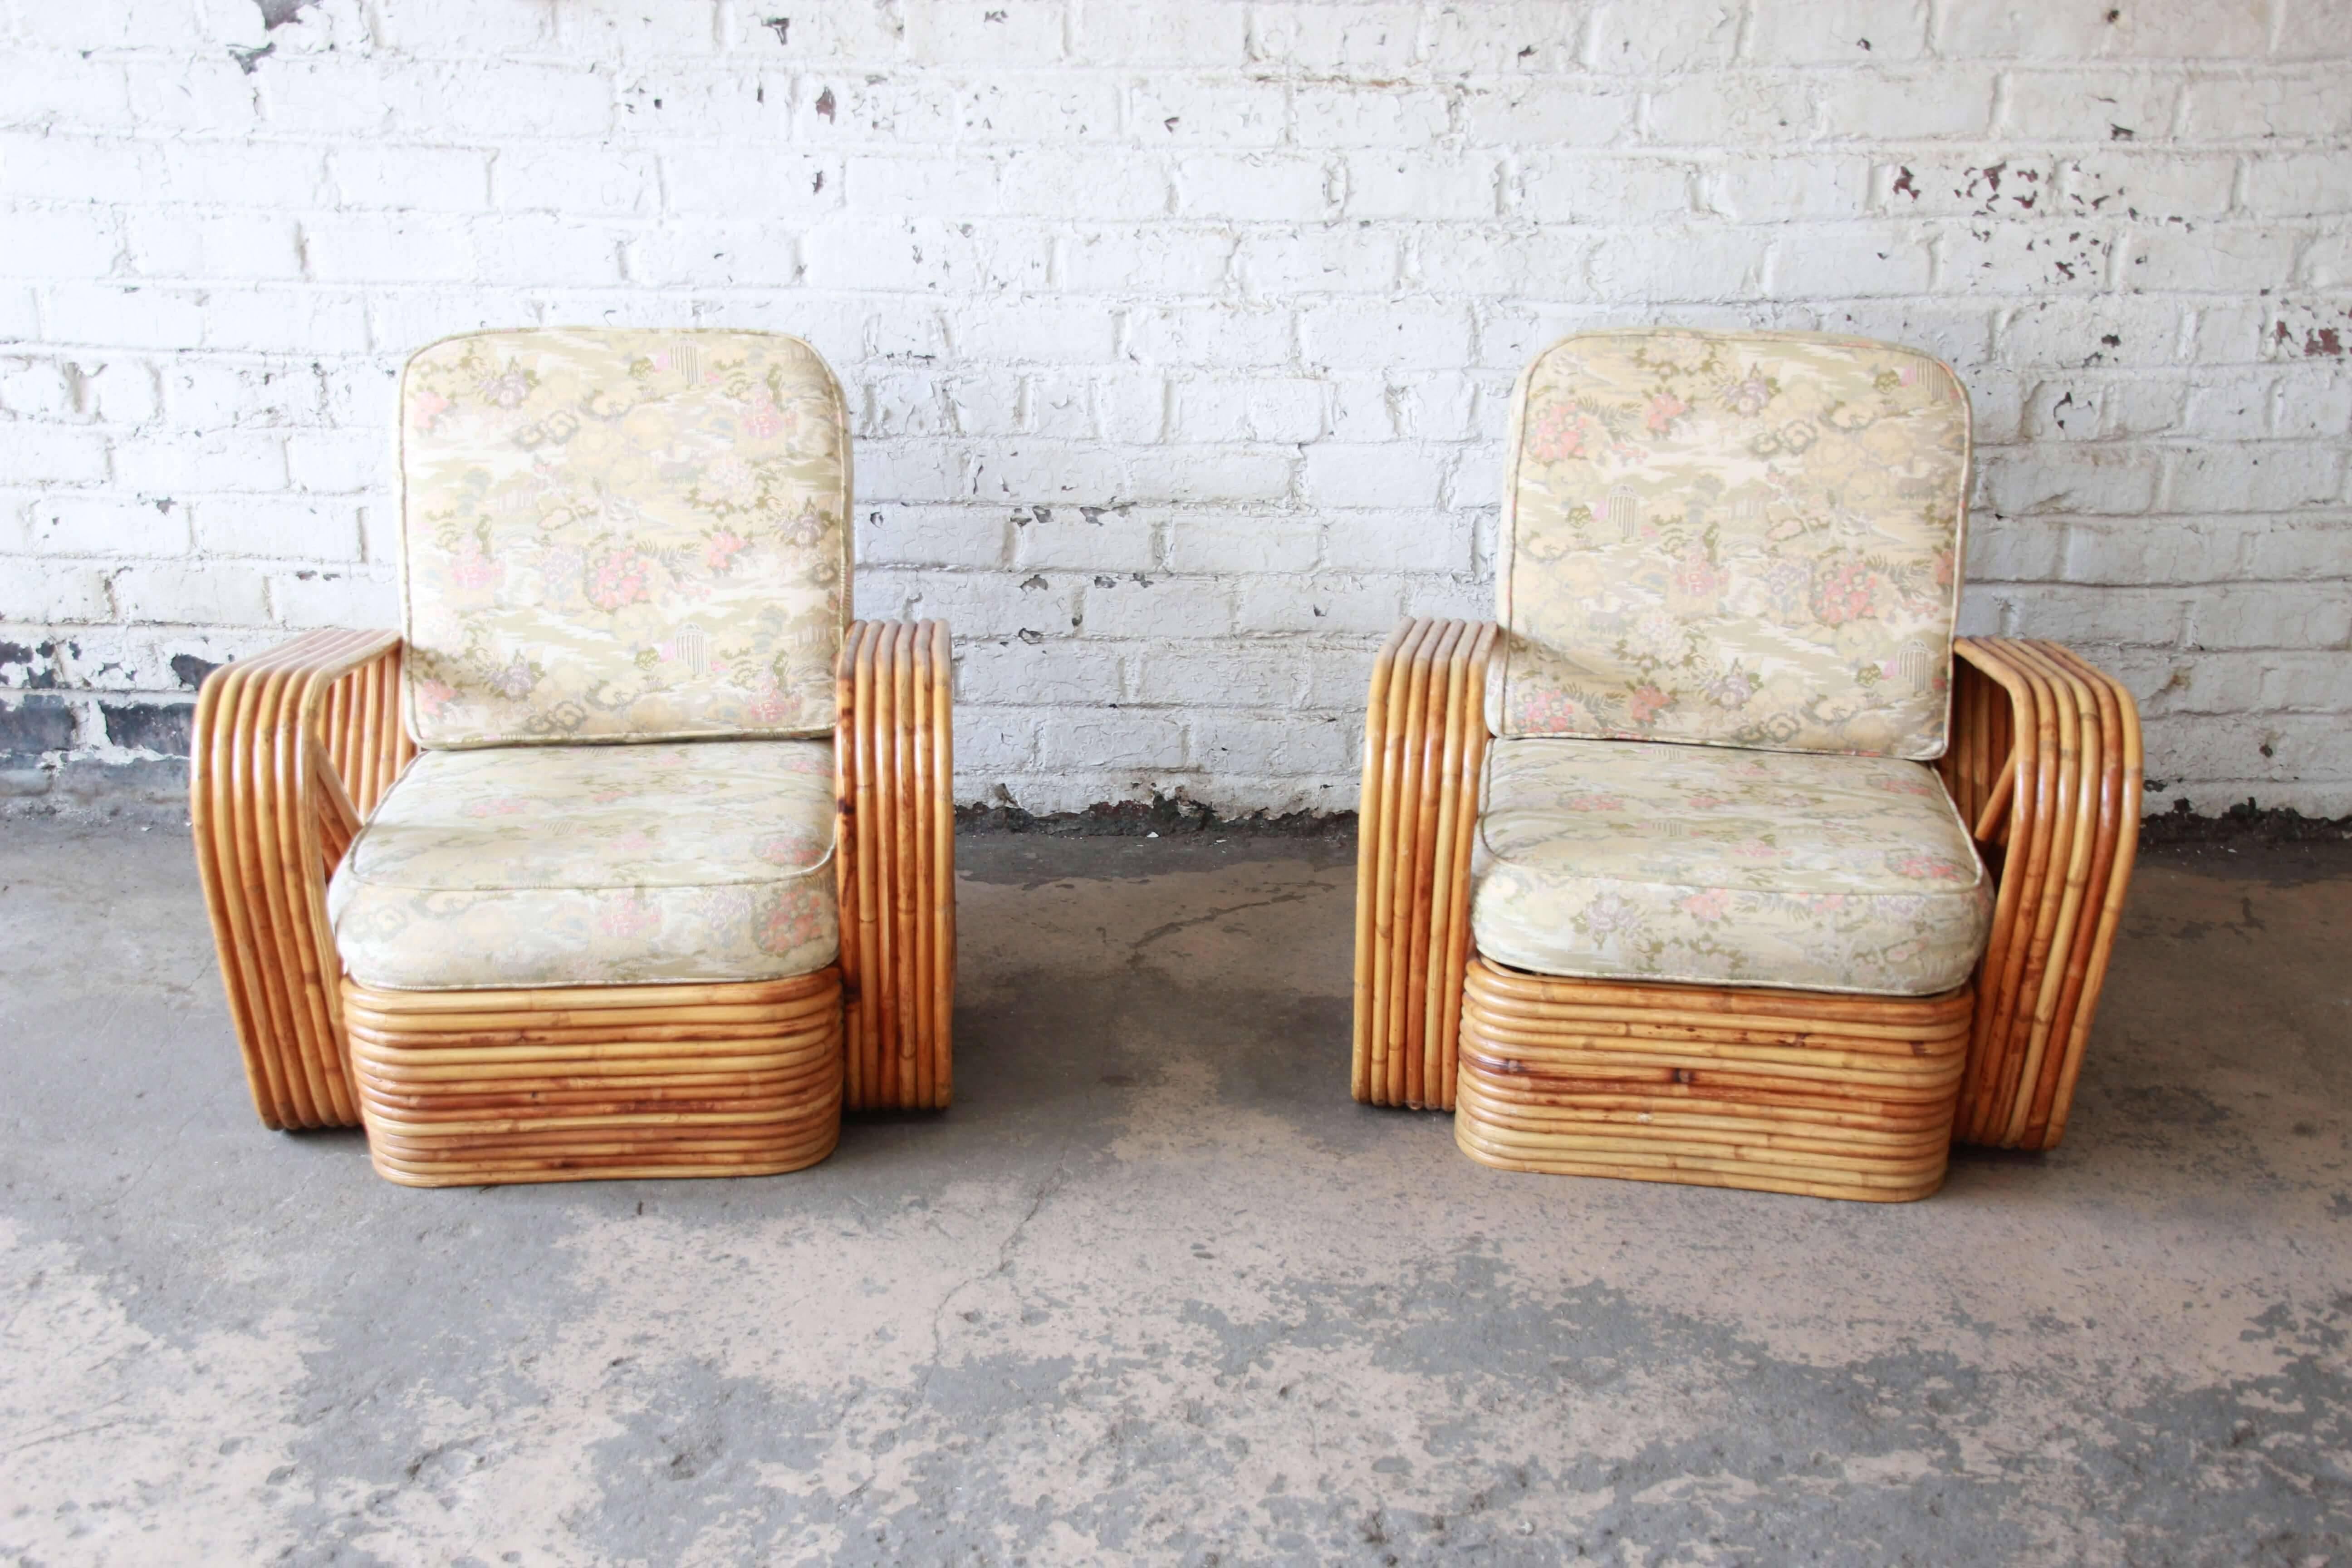 Offering a very nice pair of bamboo Pretzel chairs attributed to Paul Frankl. The chairs feature an unmistakable six-strand pretzel design. The rattan is in good condition with normal wear from age and use. The upholstery is clean with a floral